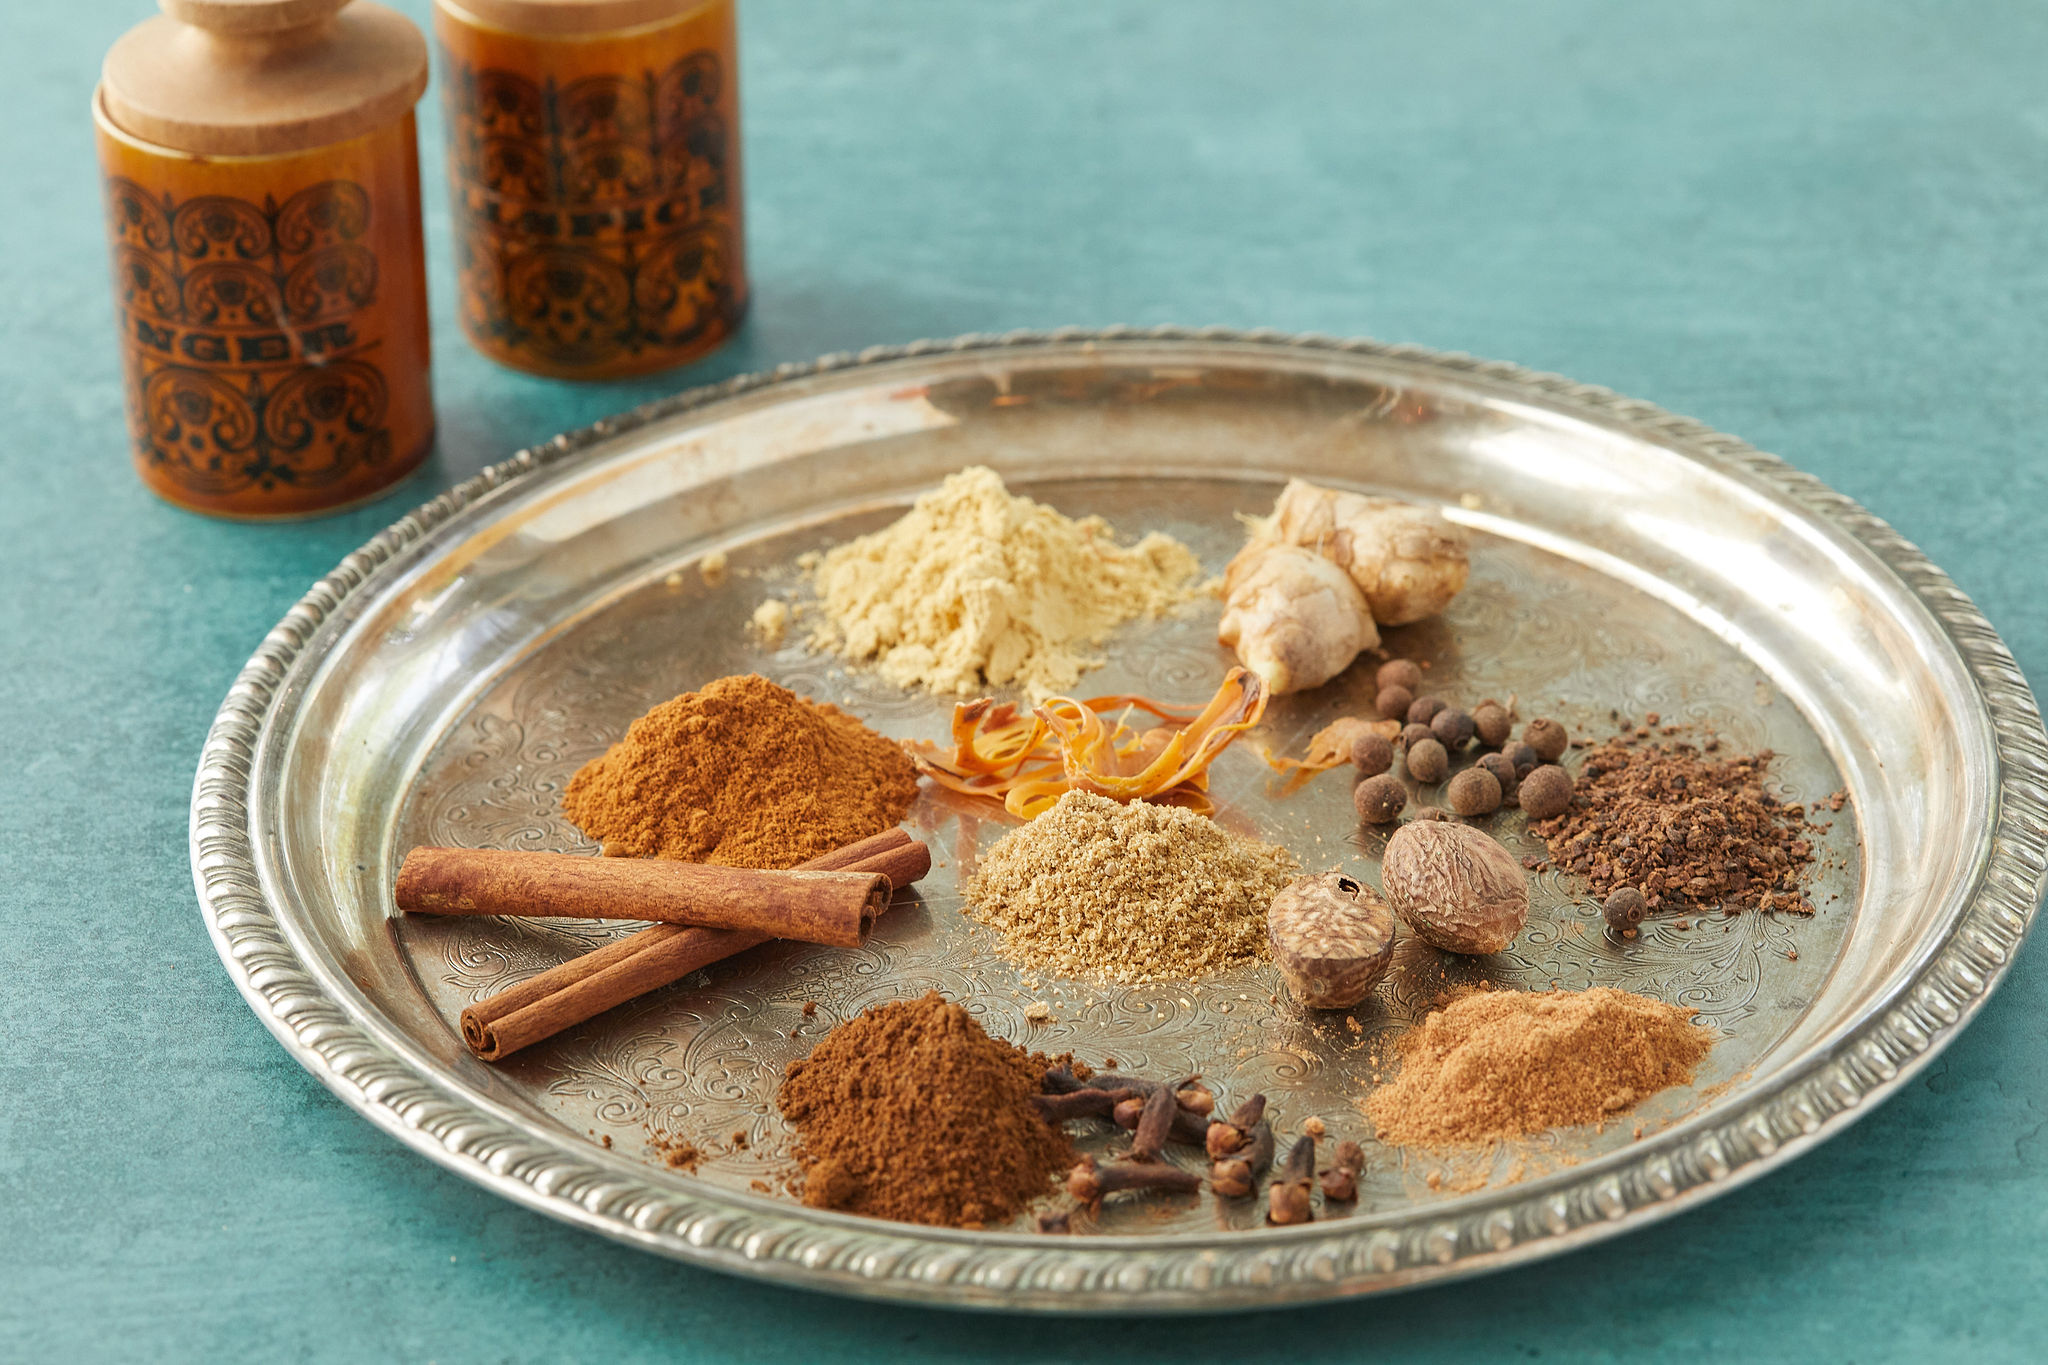 A platter of the spices that goes into making your own mixed spice.